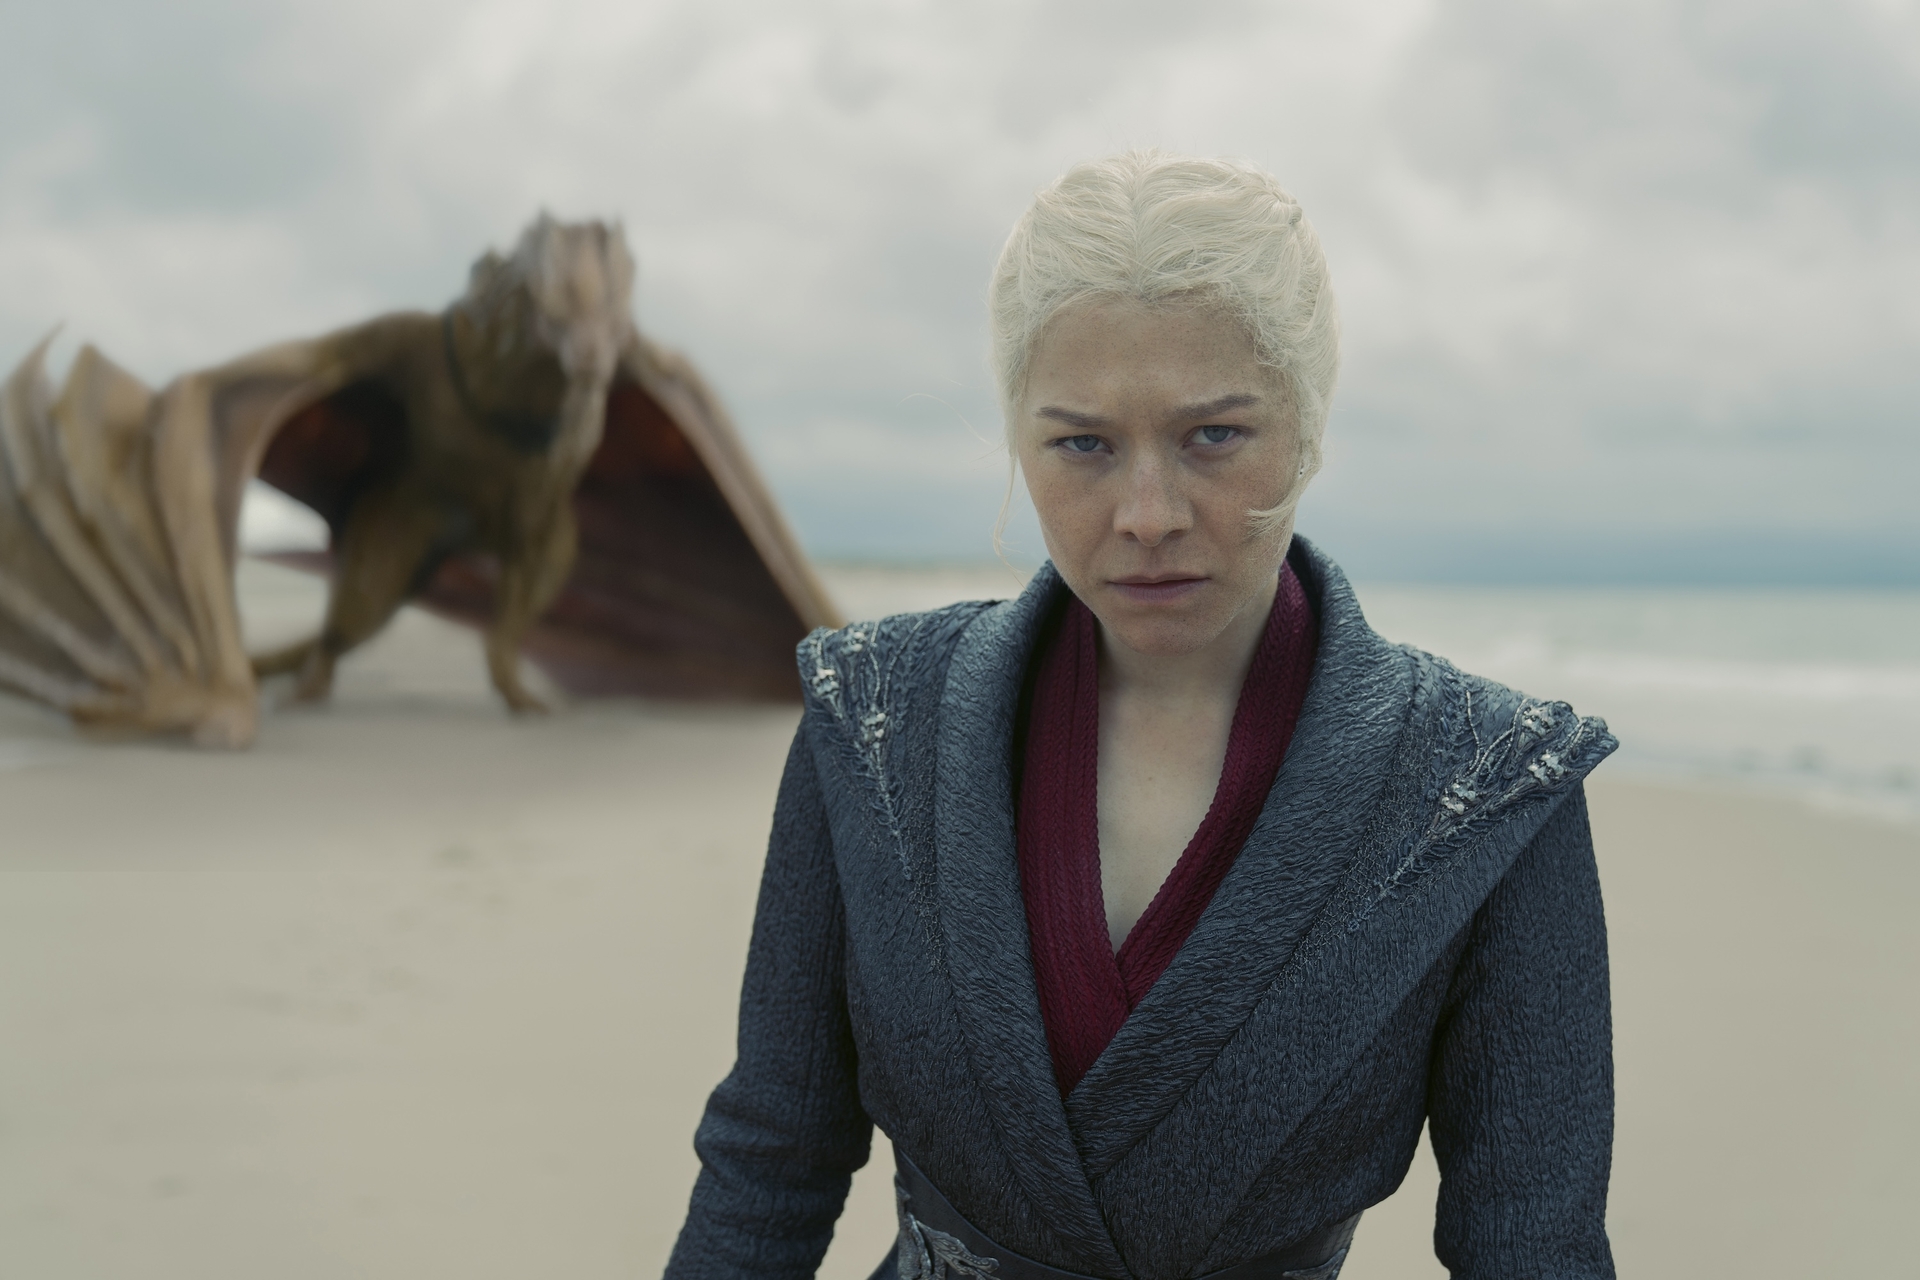 HBO announced that House of the Dragon was renewed for Season Three before Season Two aired